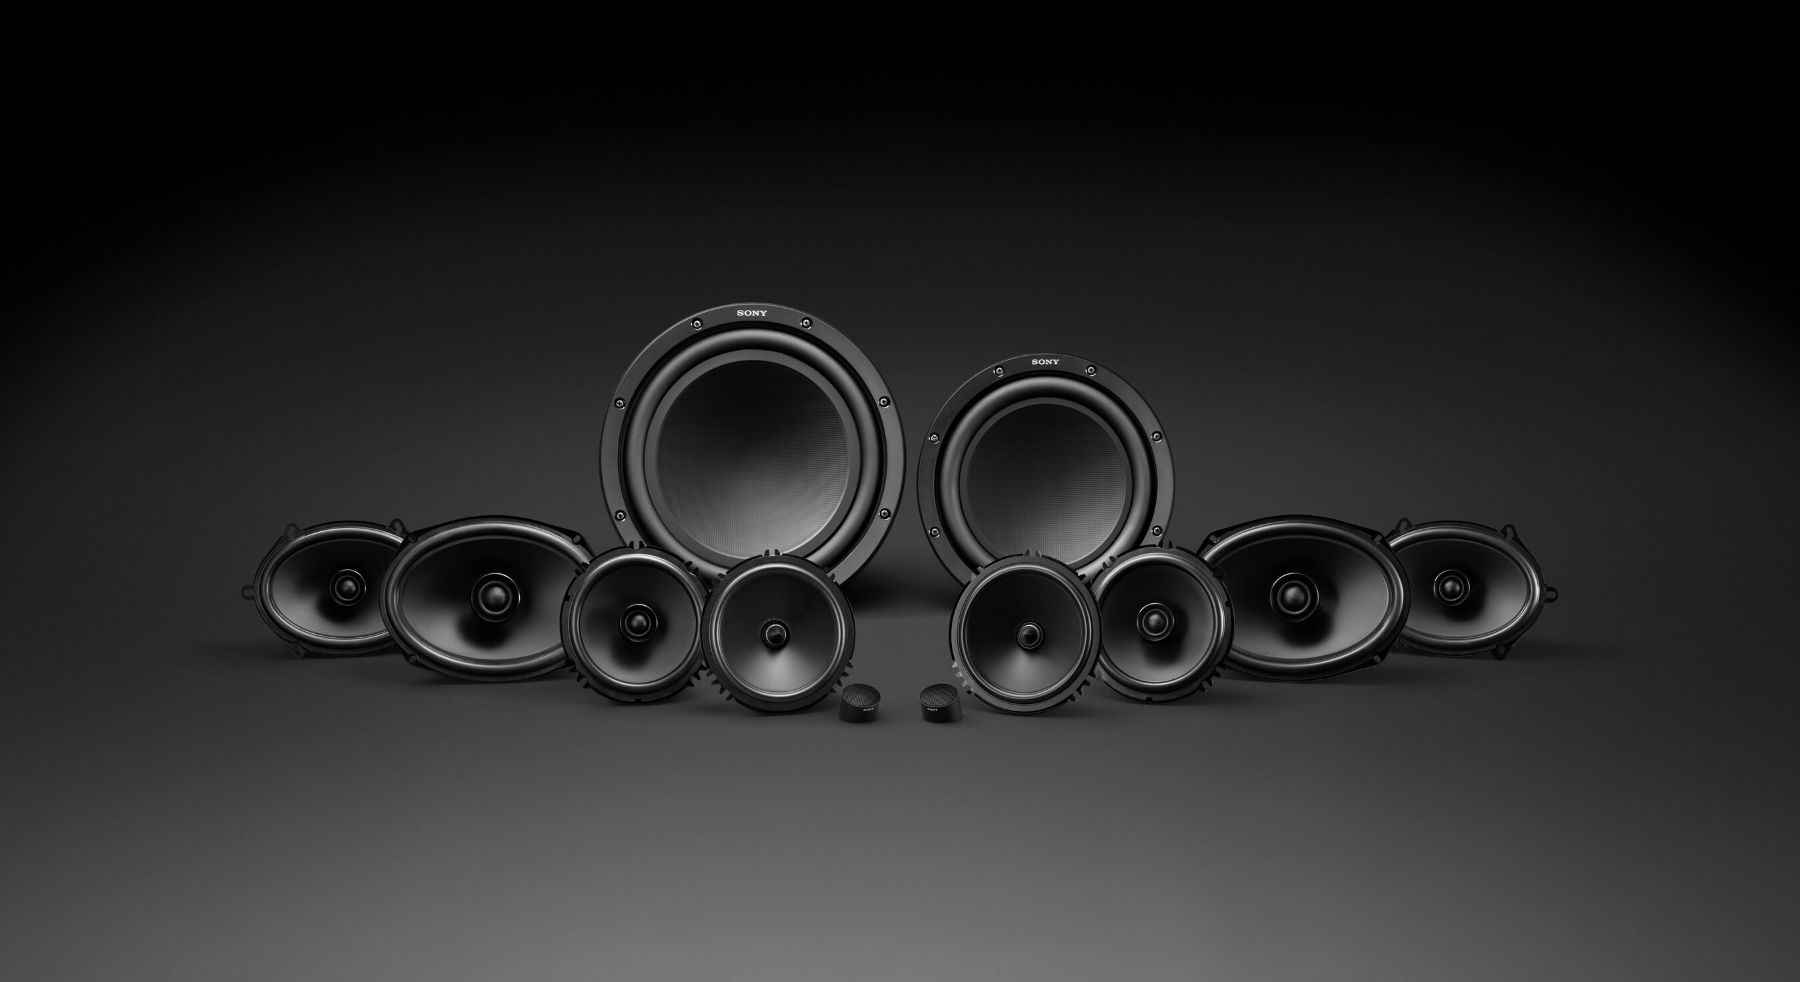 Sony Electronics Introduces Six New Products in Latest Car Speaker and Subwoofer Lineup